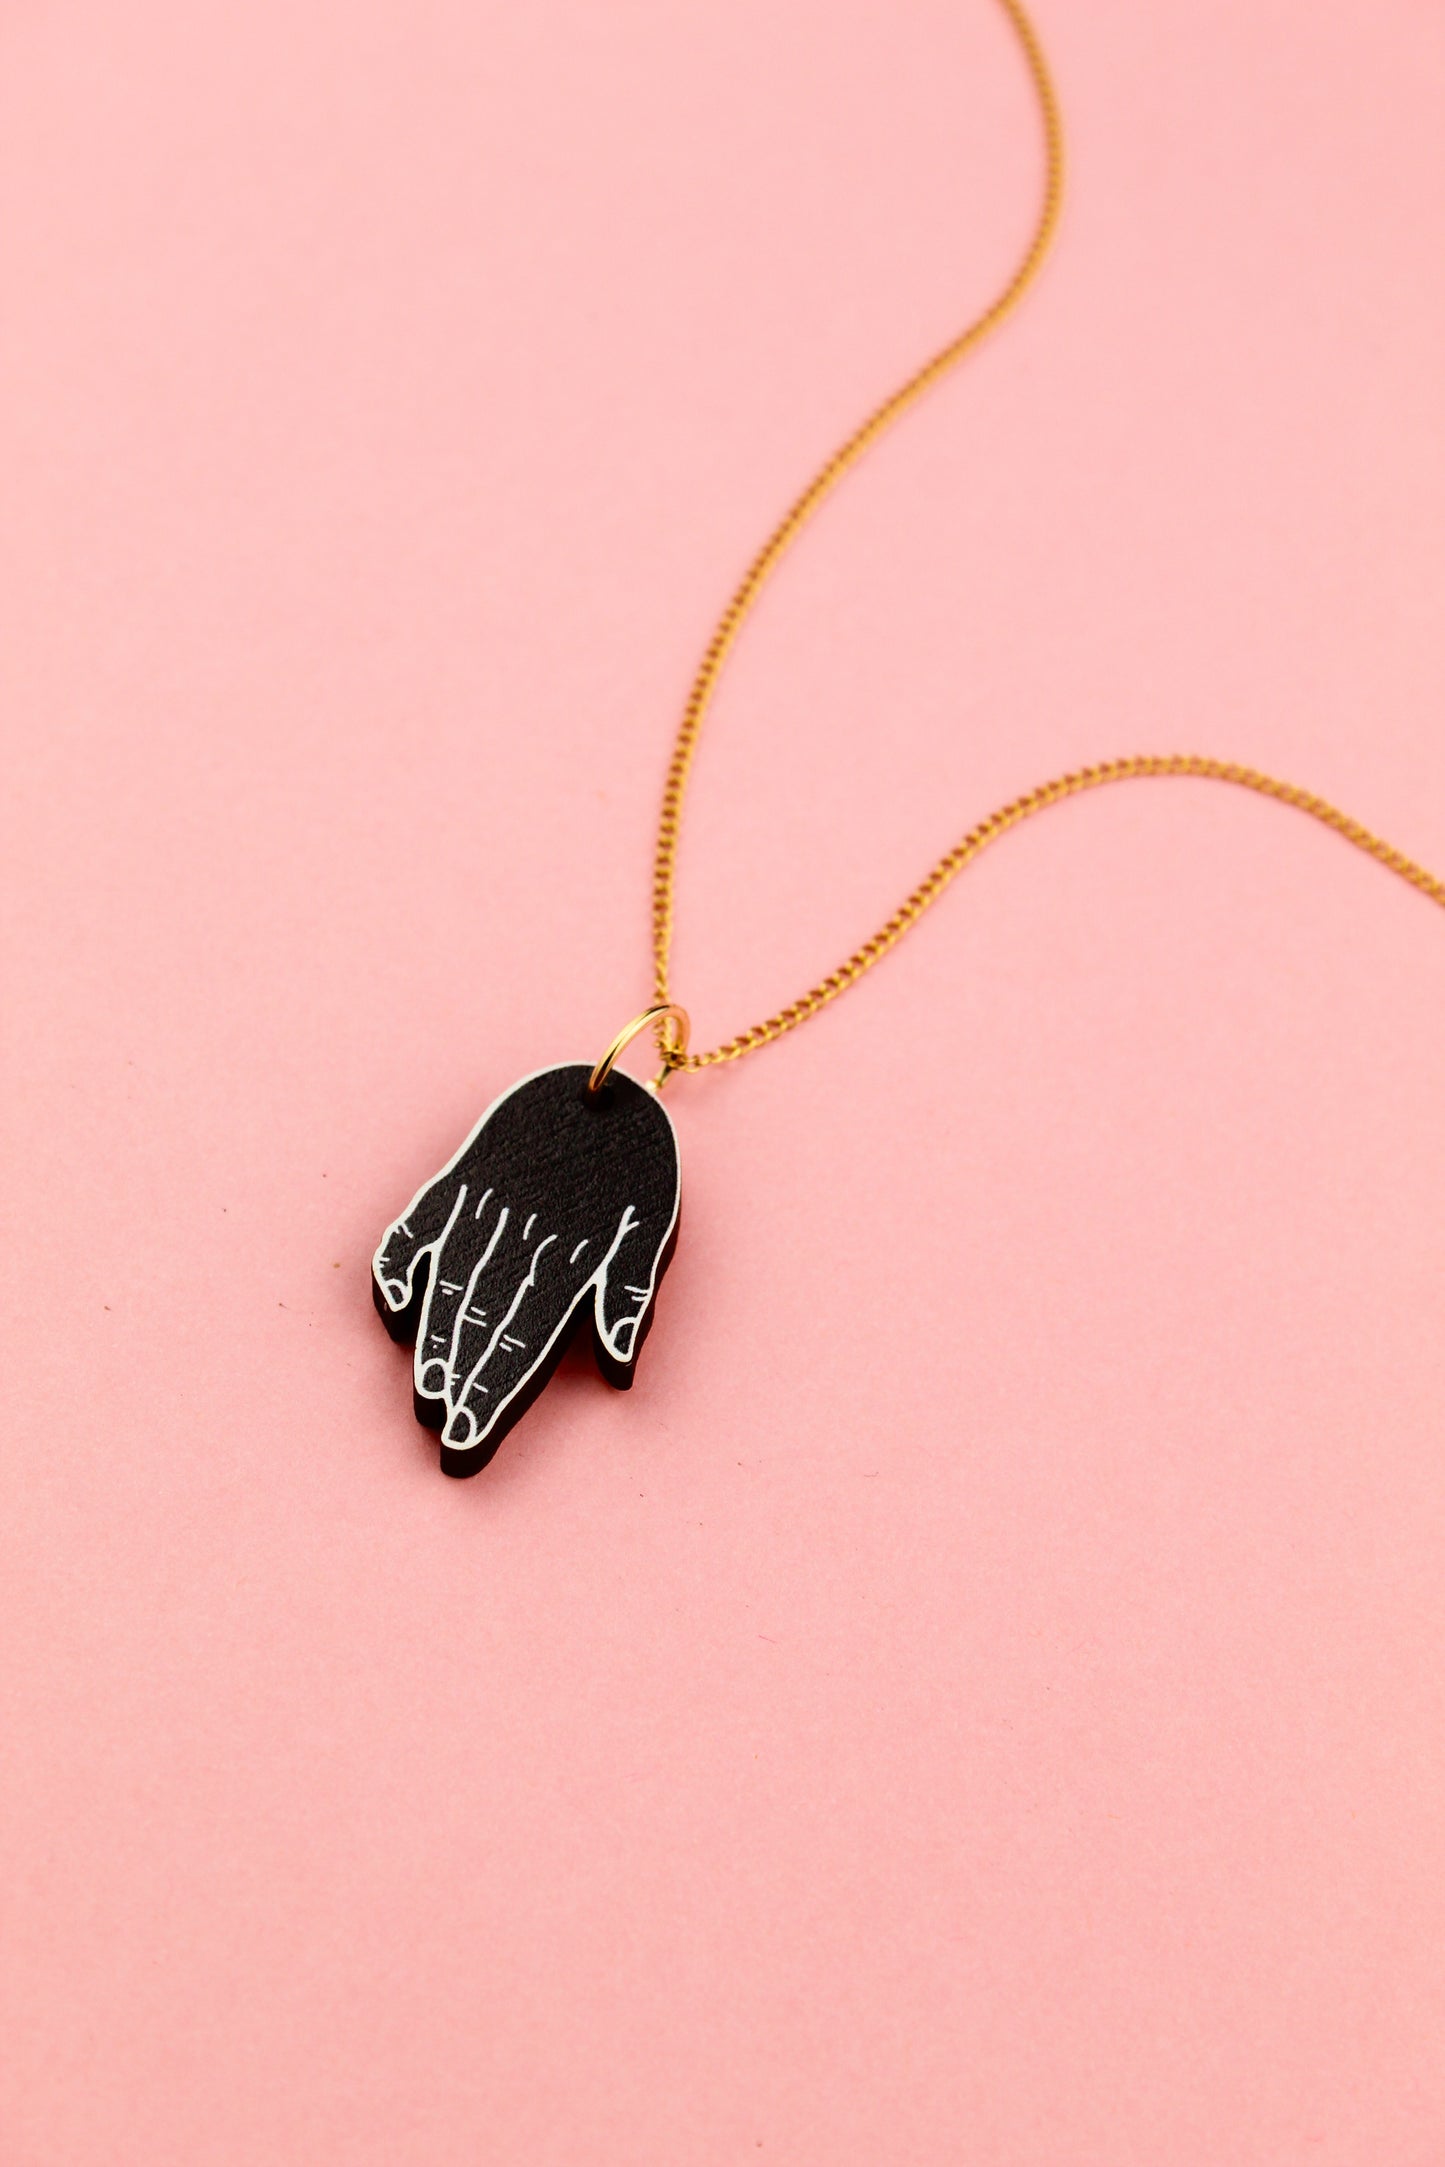 Mourning Hand Pendant Necklace